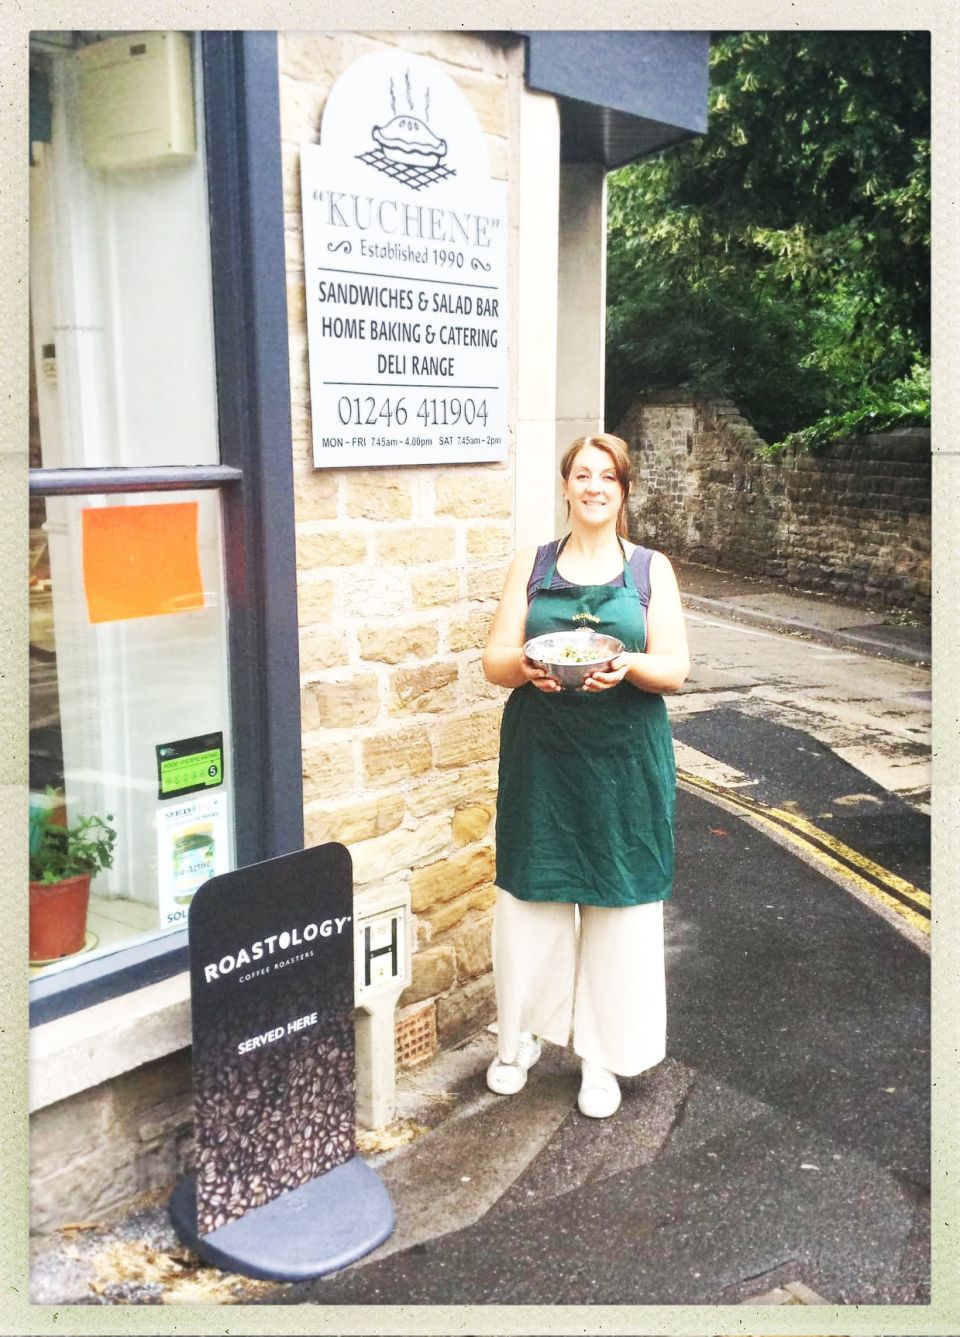 Kerry, the owner of Kuchene Deli Dronfield outside the shop